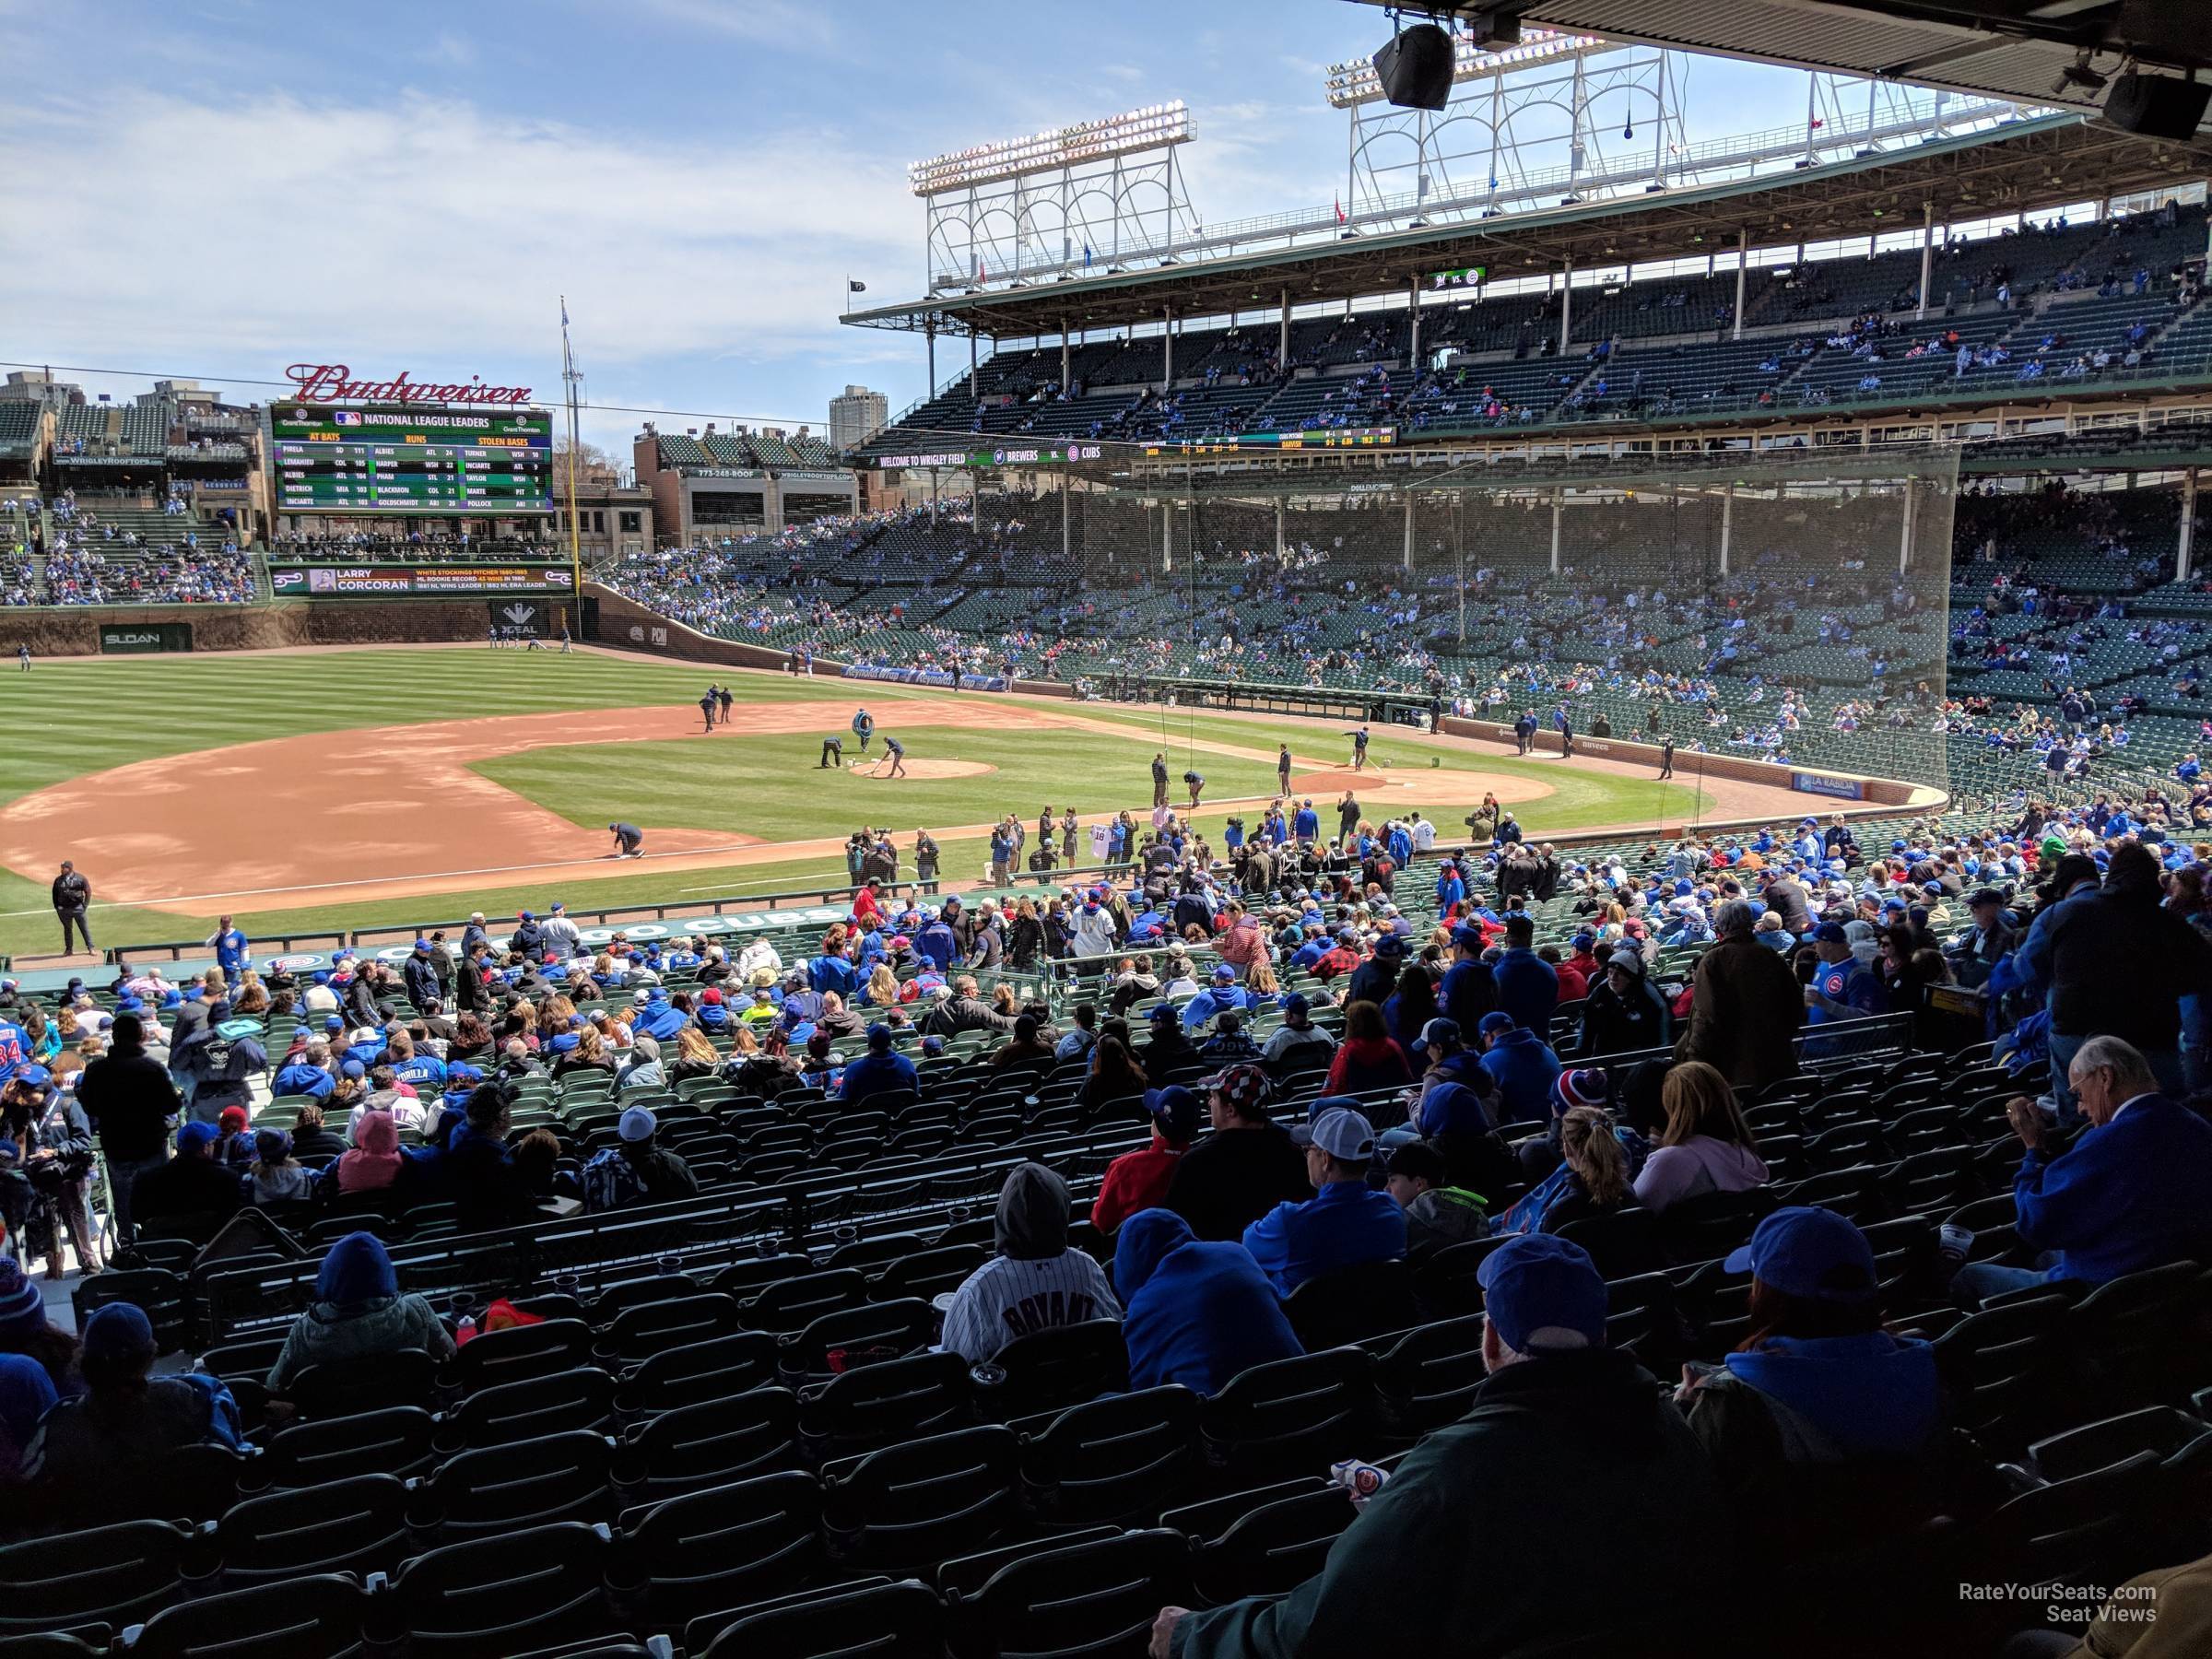 Our Cubs Season Tickets Sec 209 Row 4, Chicago IL